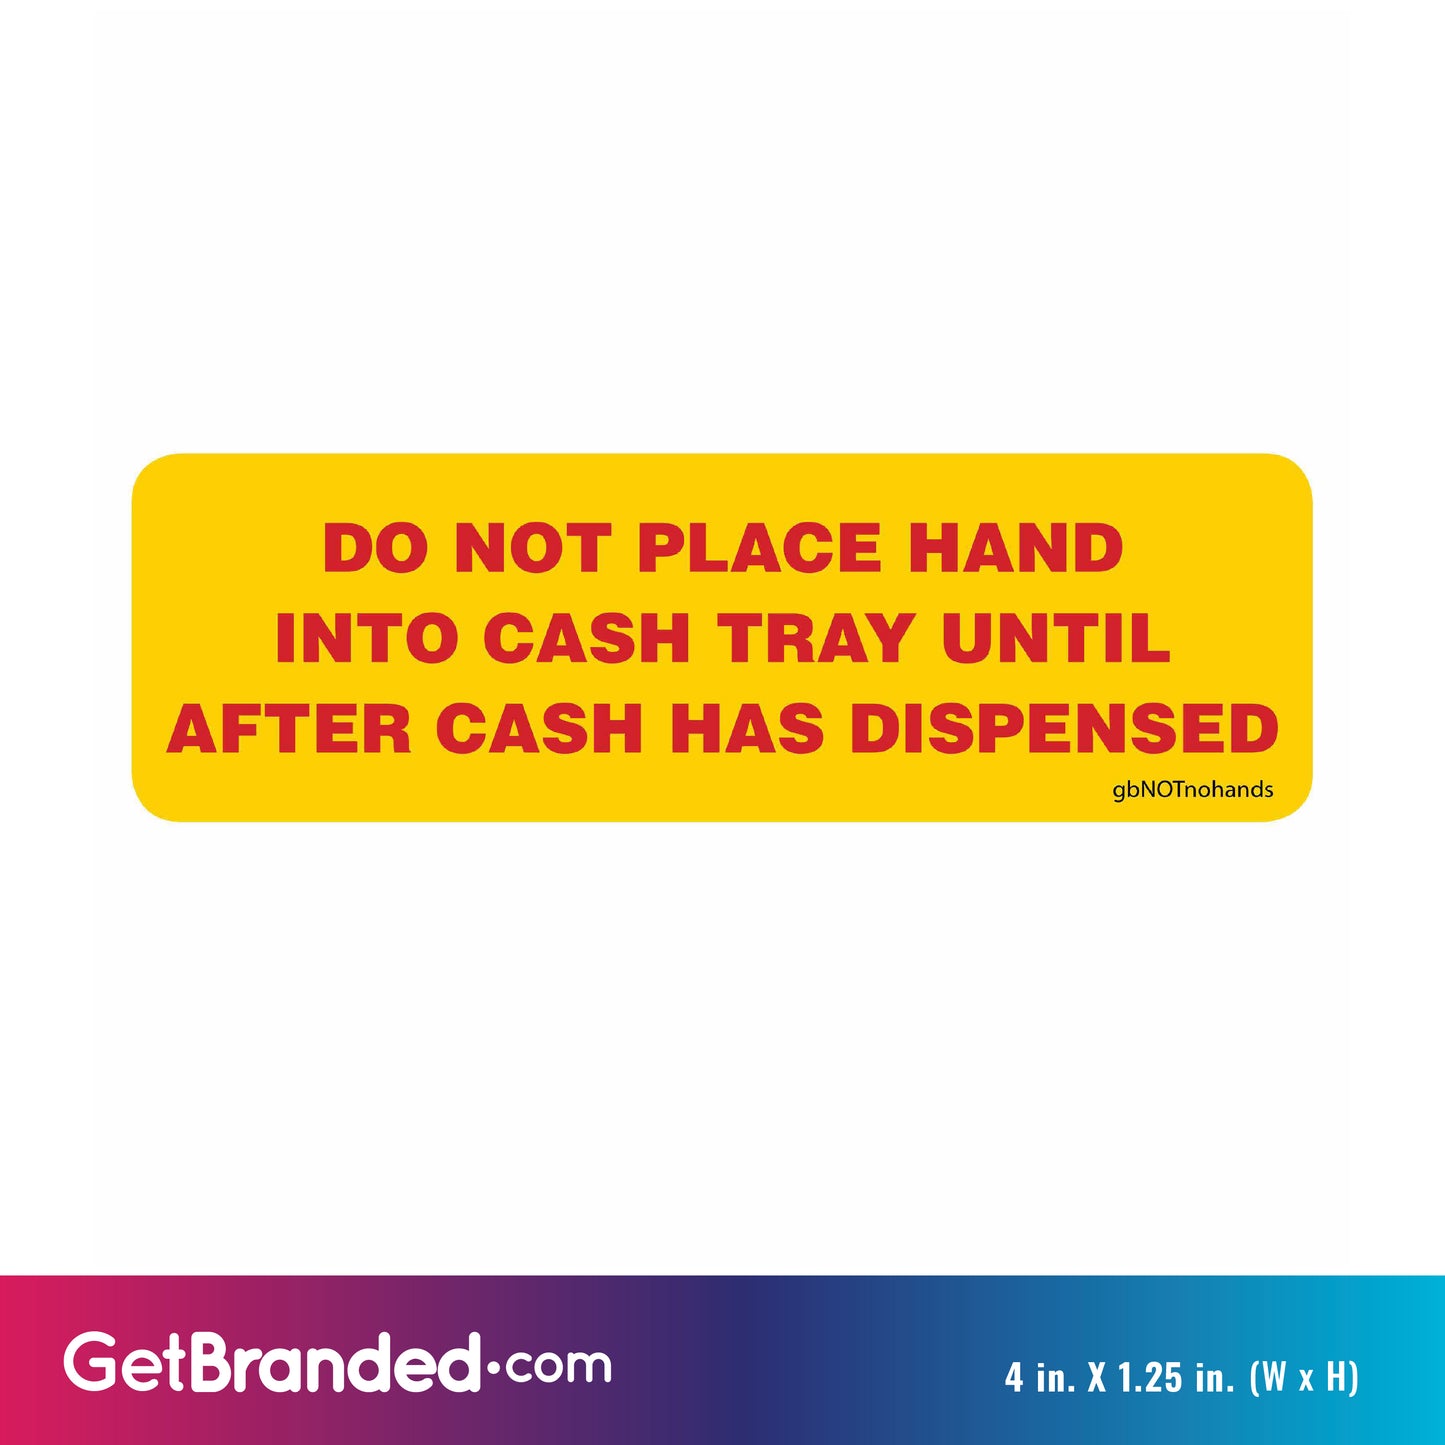 Do Not Place Hand Into Cash Tray Decal size guide.